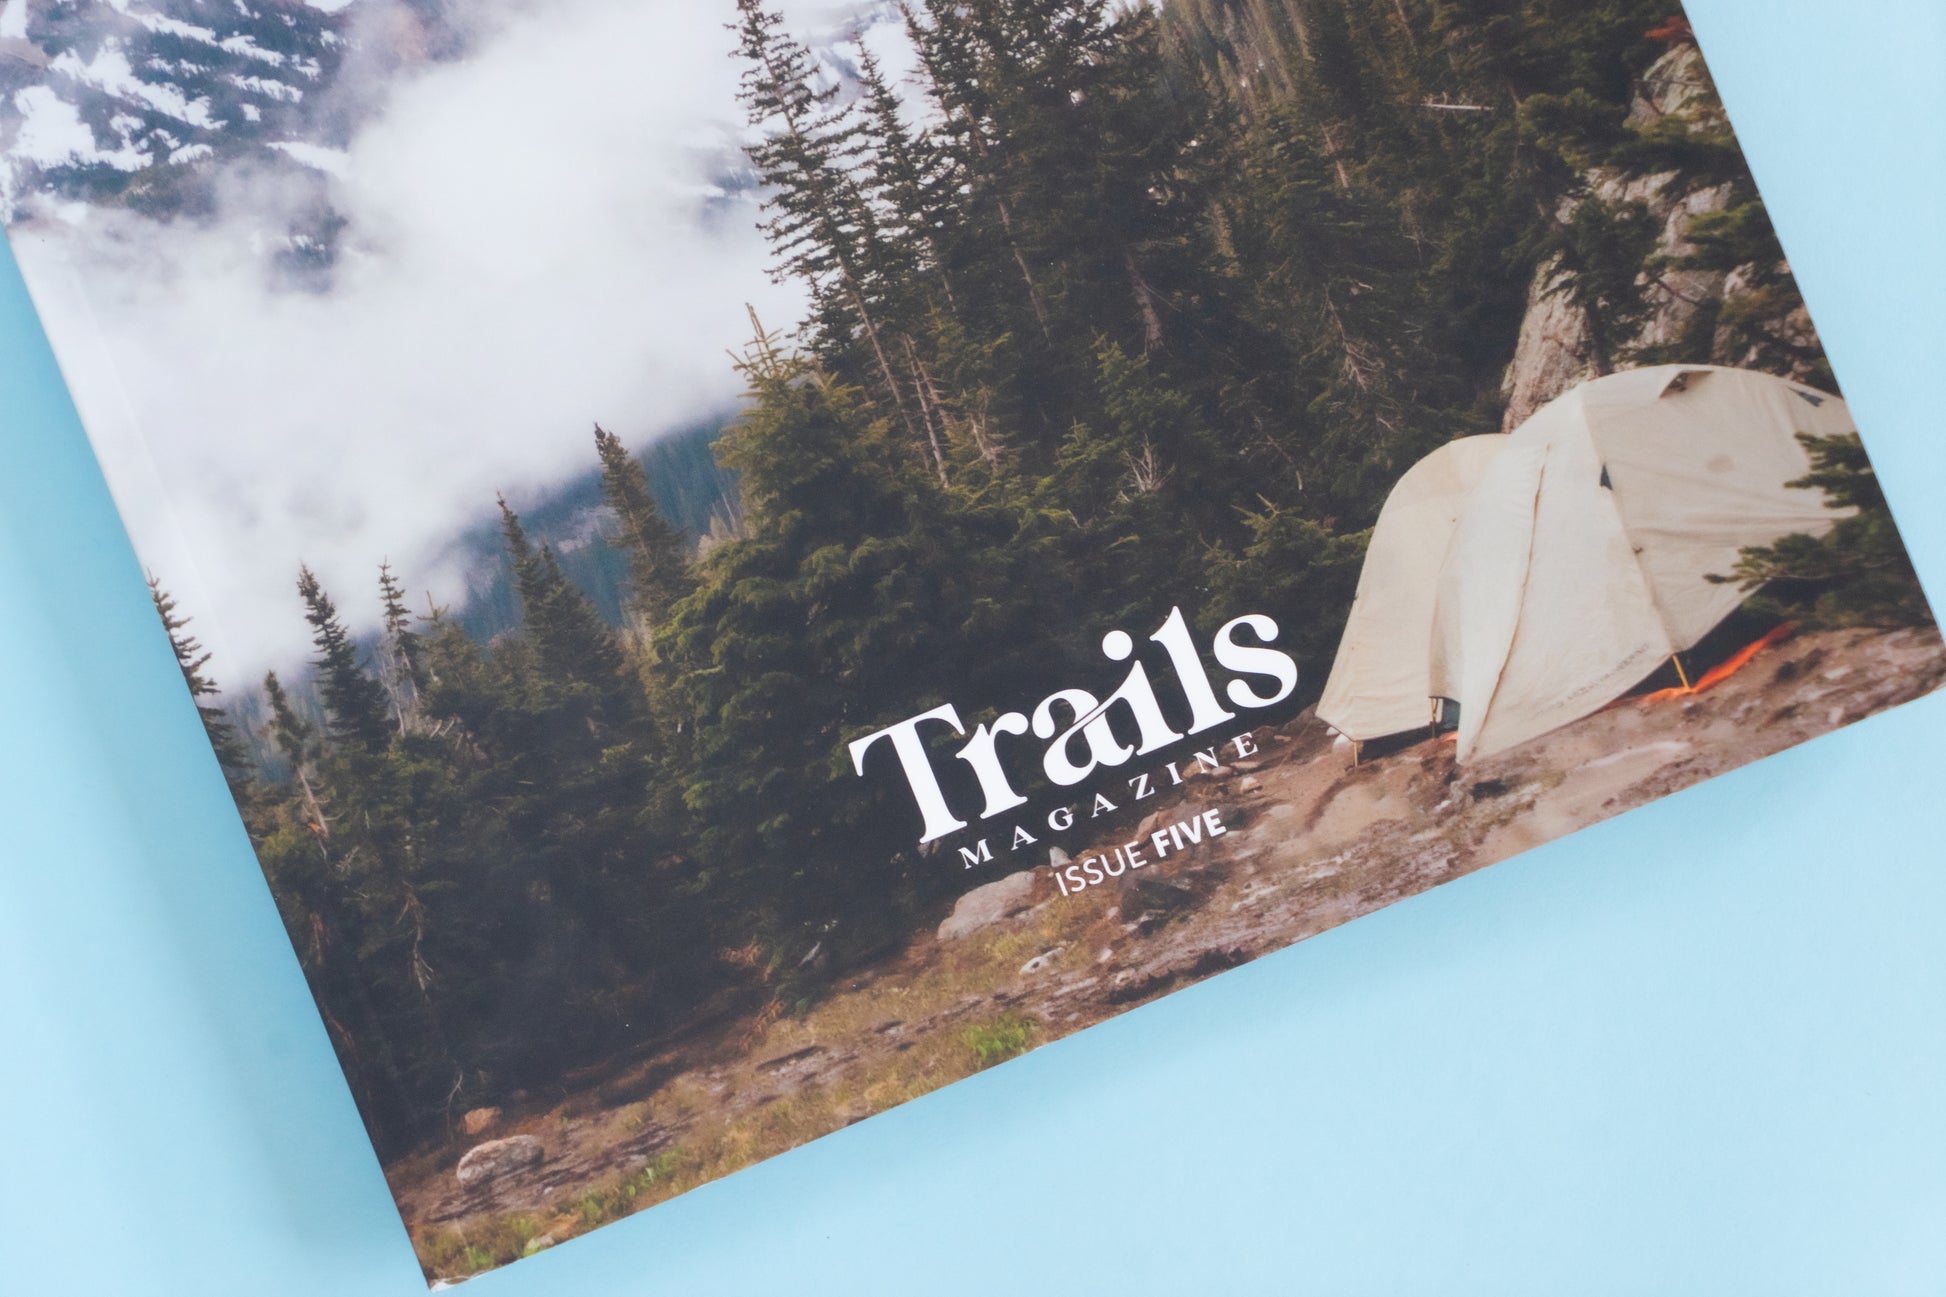 The bottom half of a magazine is over a blue background. The cover image is of white tent in the backcountry of a cold and foggy mountain scene. The text "Trails Magazine - Issue 5" is centered at the bottom.